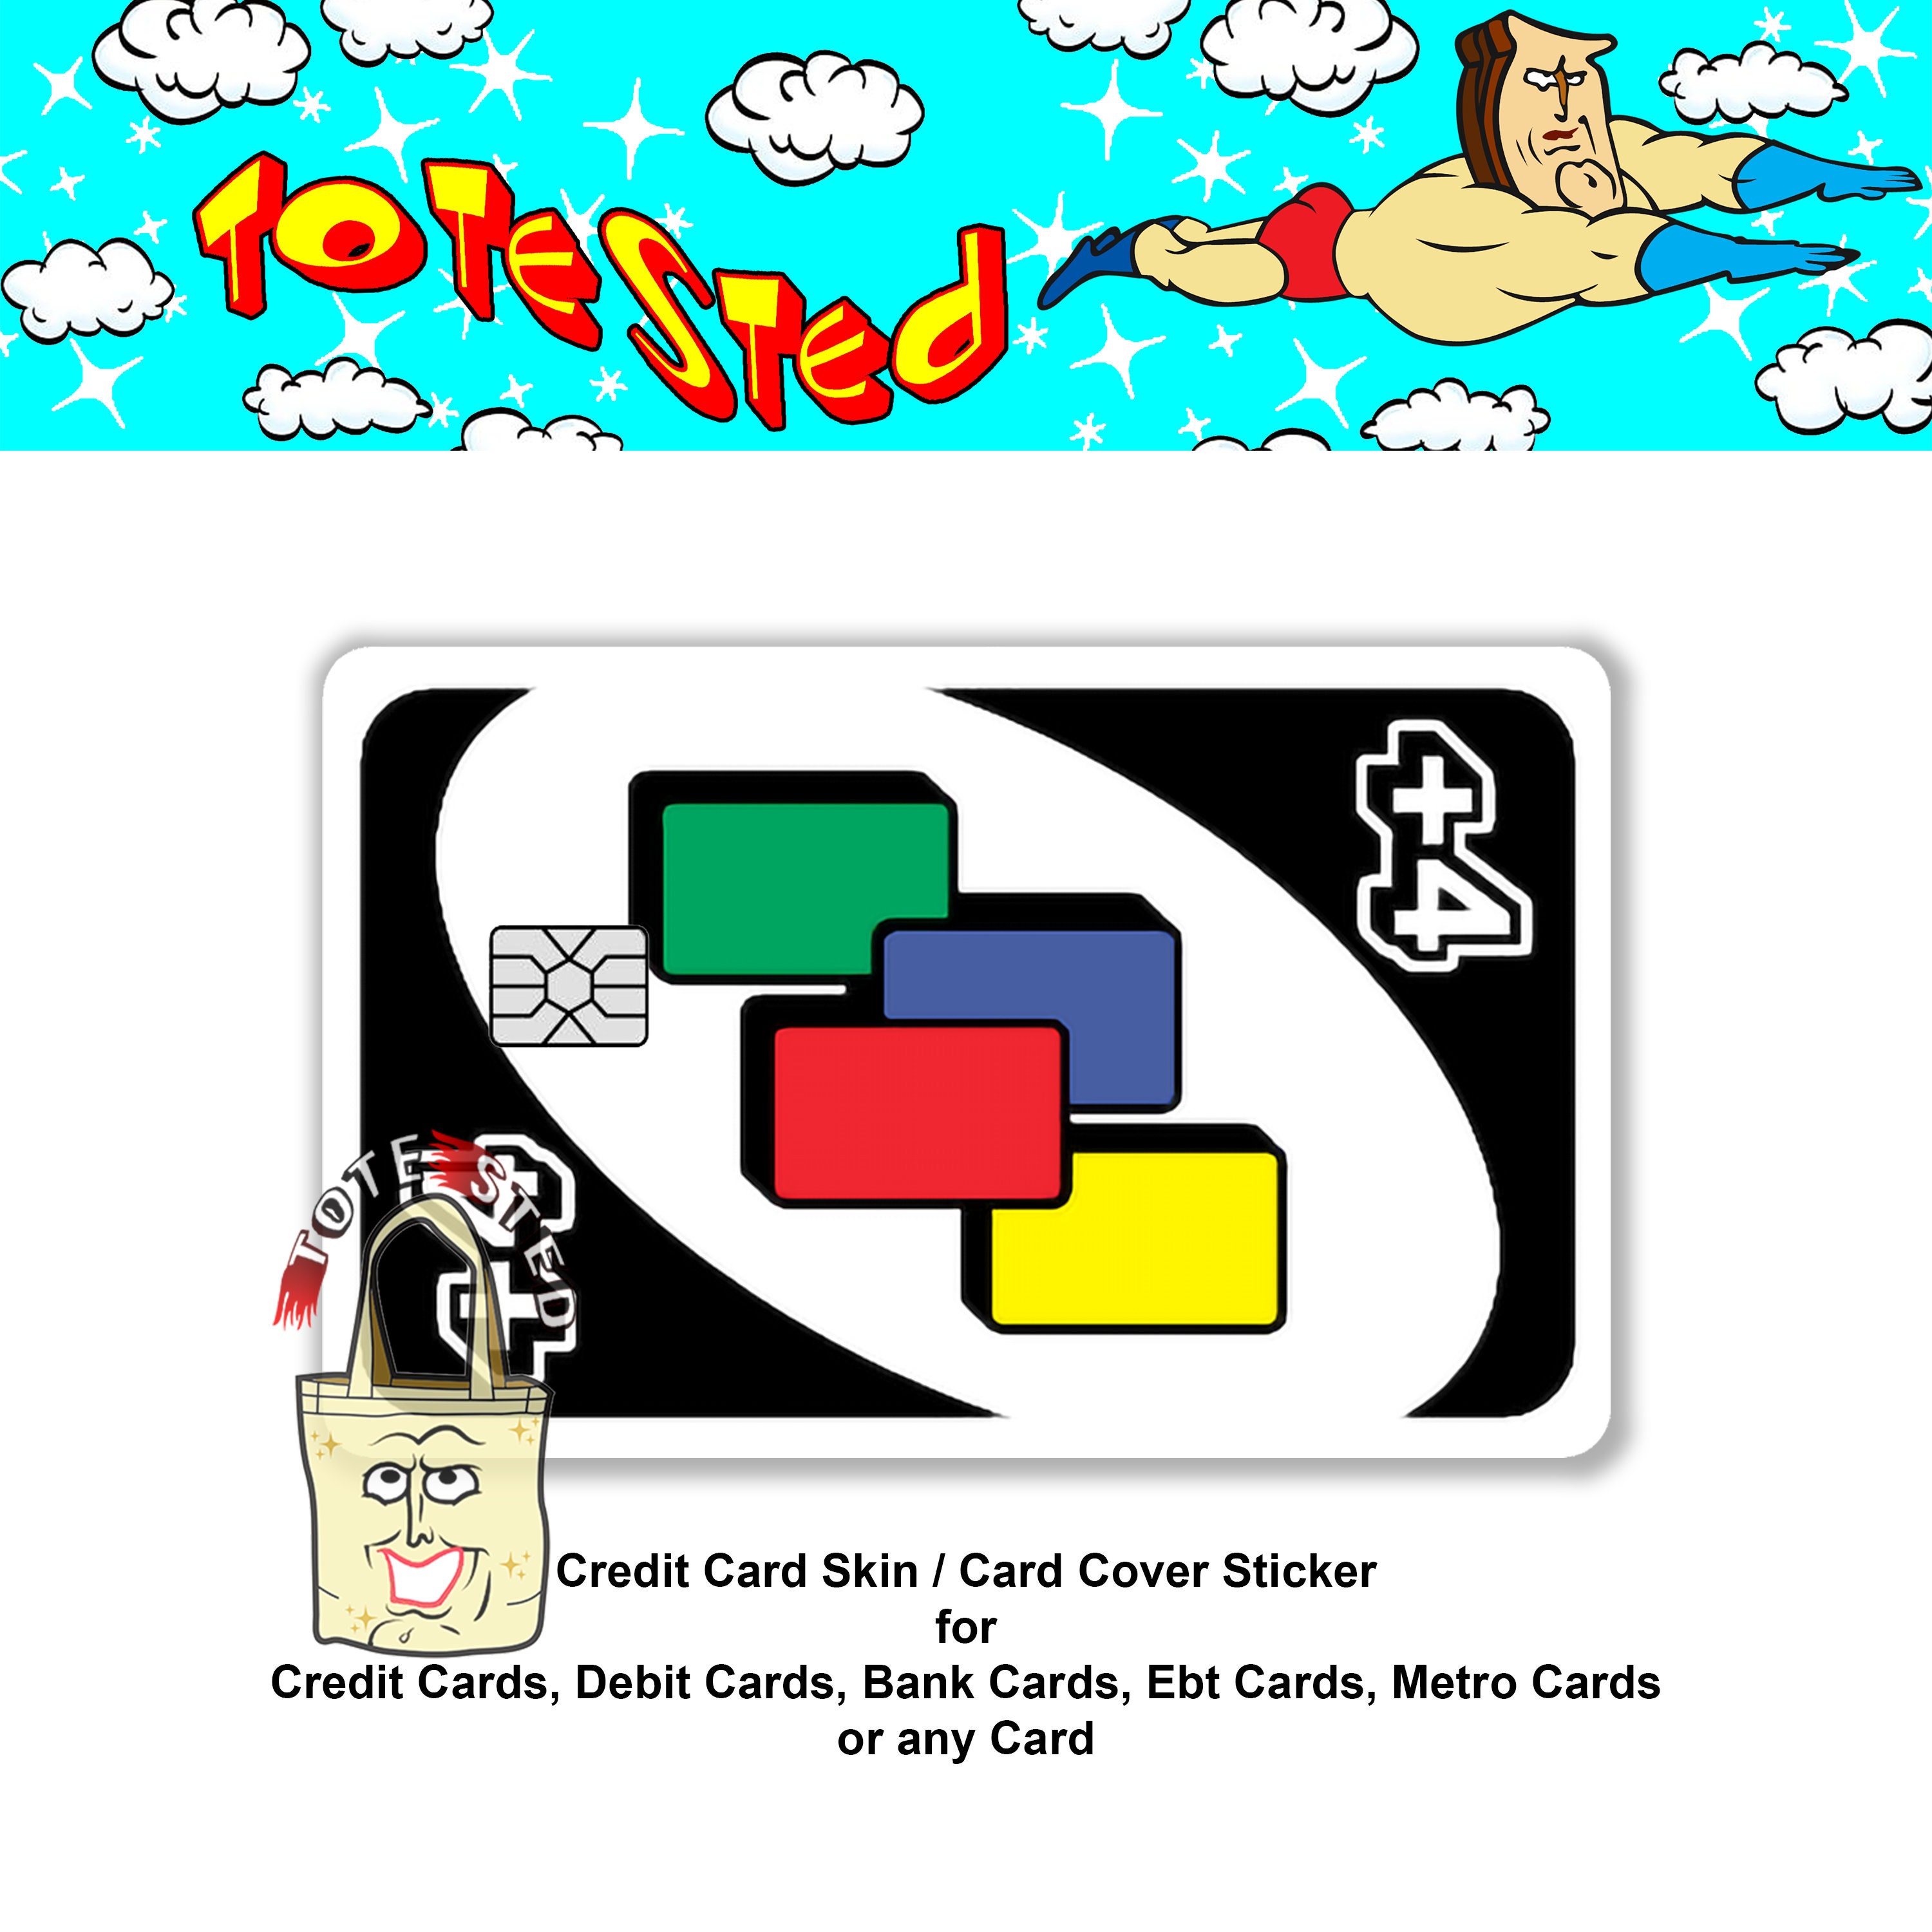 Customizable Uno Card Meme  Greeting Card for Sale by Goath in